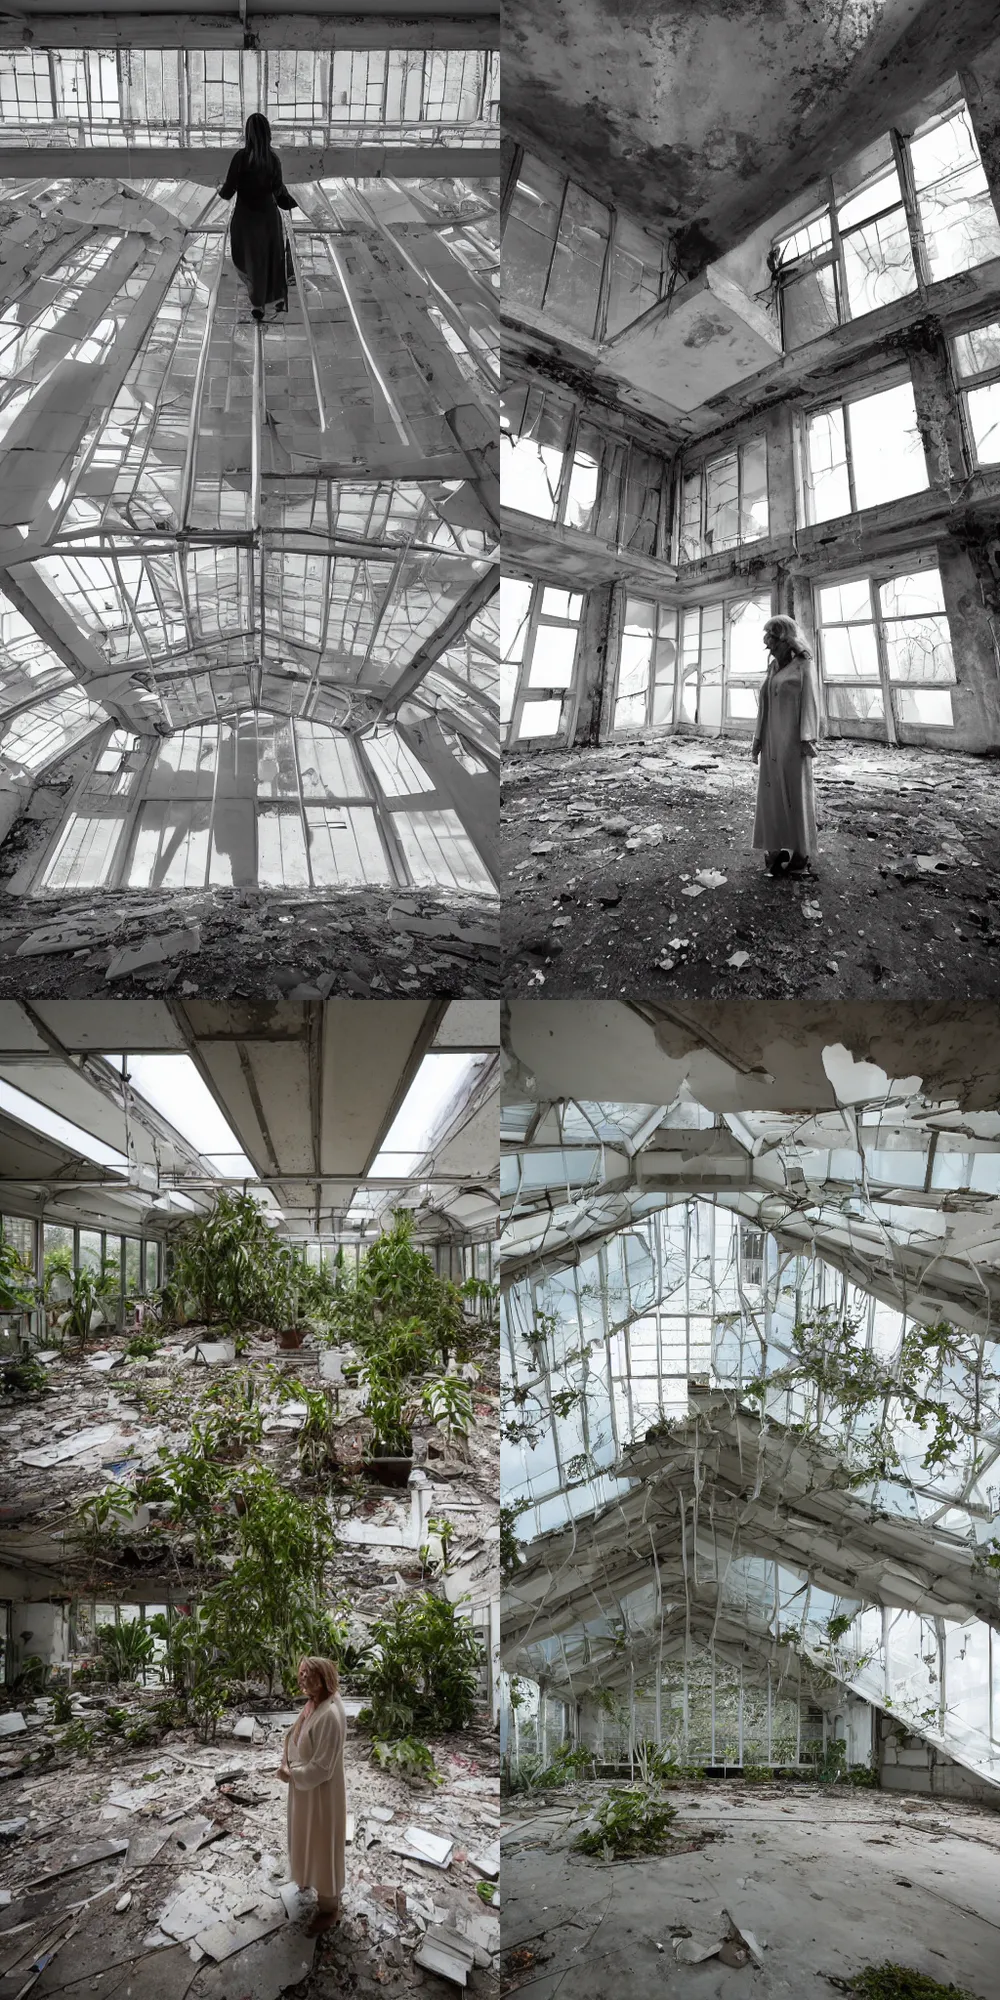 Prompt: Wide angle full shot of a white woman standing still in a large abandoned and empty room. She\'s seen from a profile view. Sunlight shining on her from glass ceiling that looks like an old greenhouse. She\'s looking up towards the ceiling. Plants have been growing in the room, but it\'s mainly concrete and metal beams. The room is dark except for where the woman is standing. Kodak portra 400